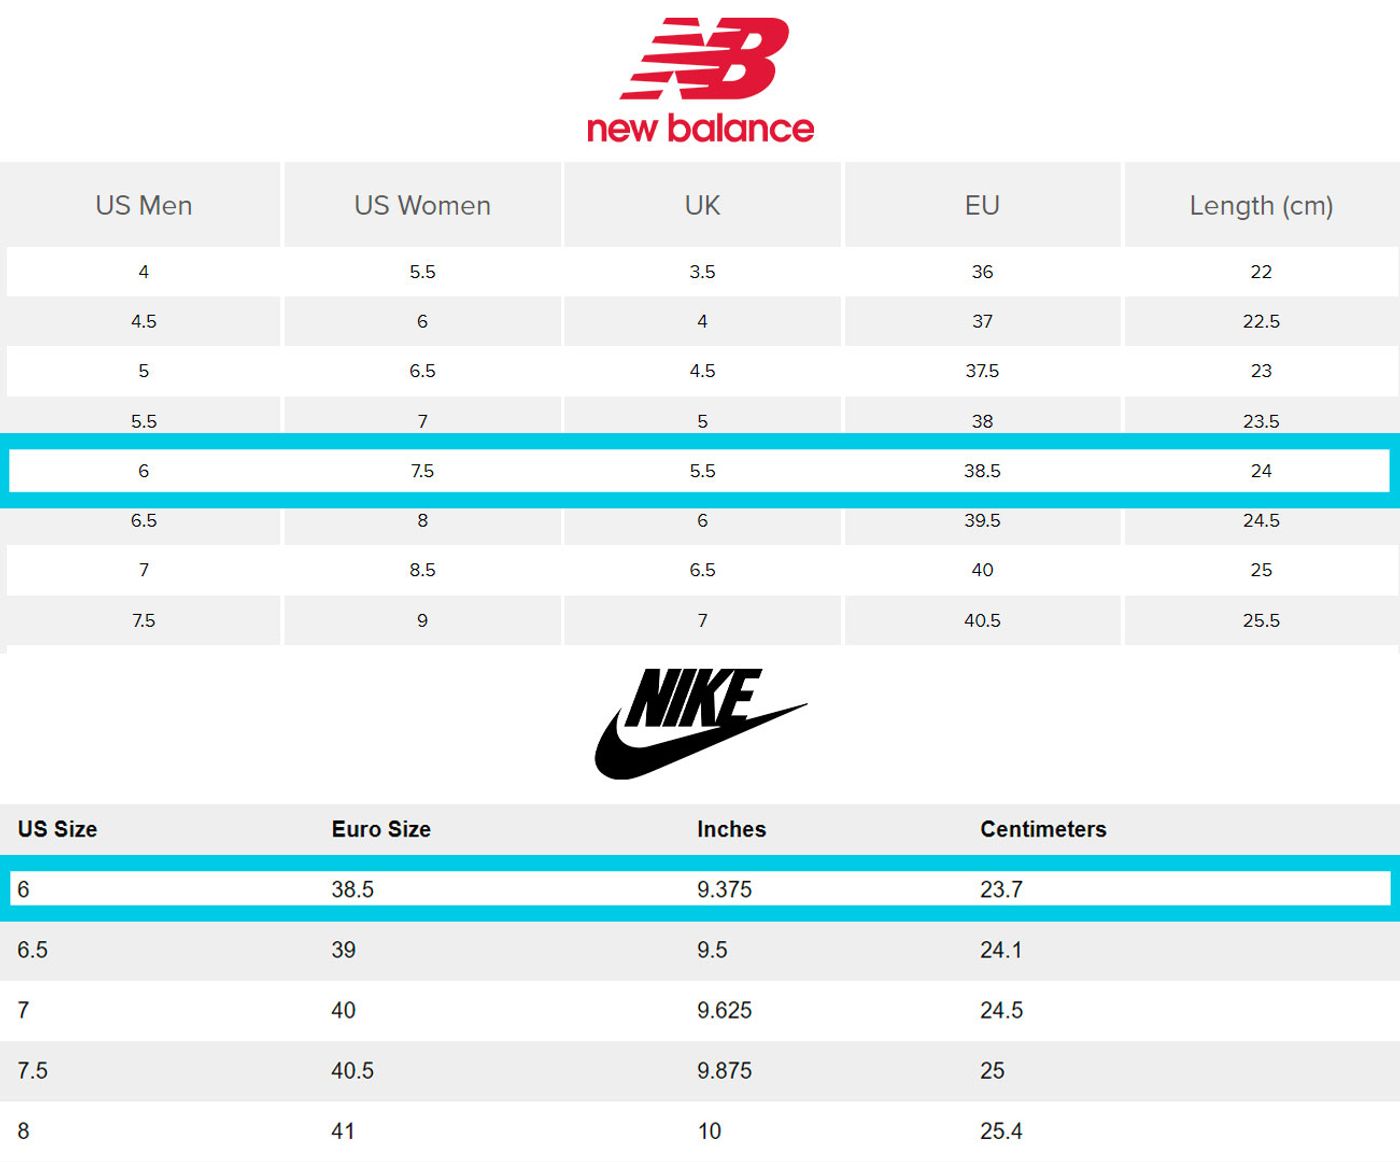 Nike vs New Balance sizing - How do they compare?